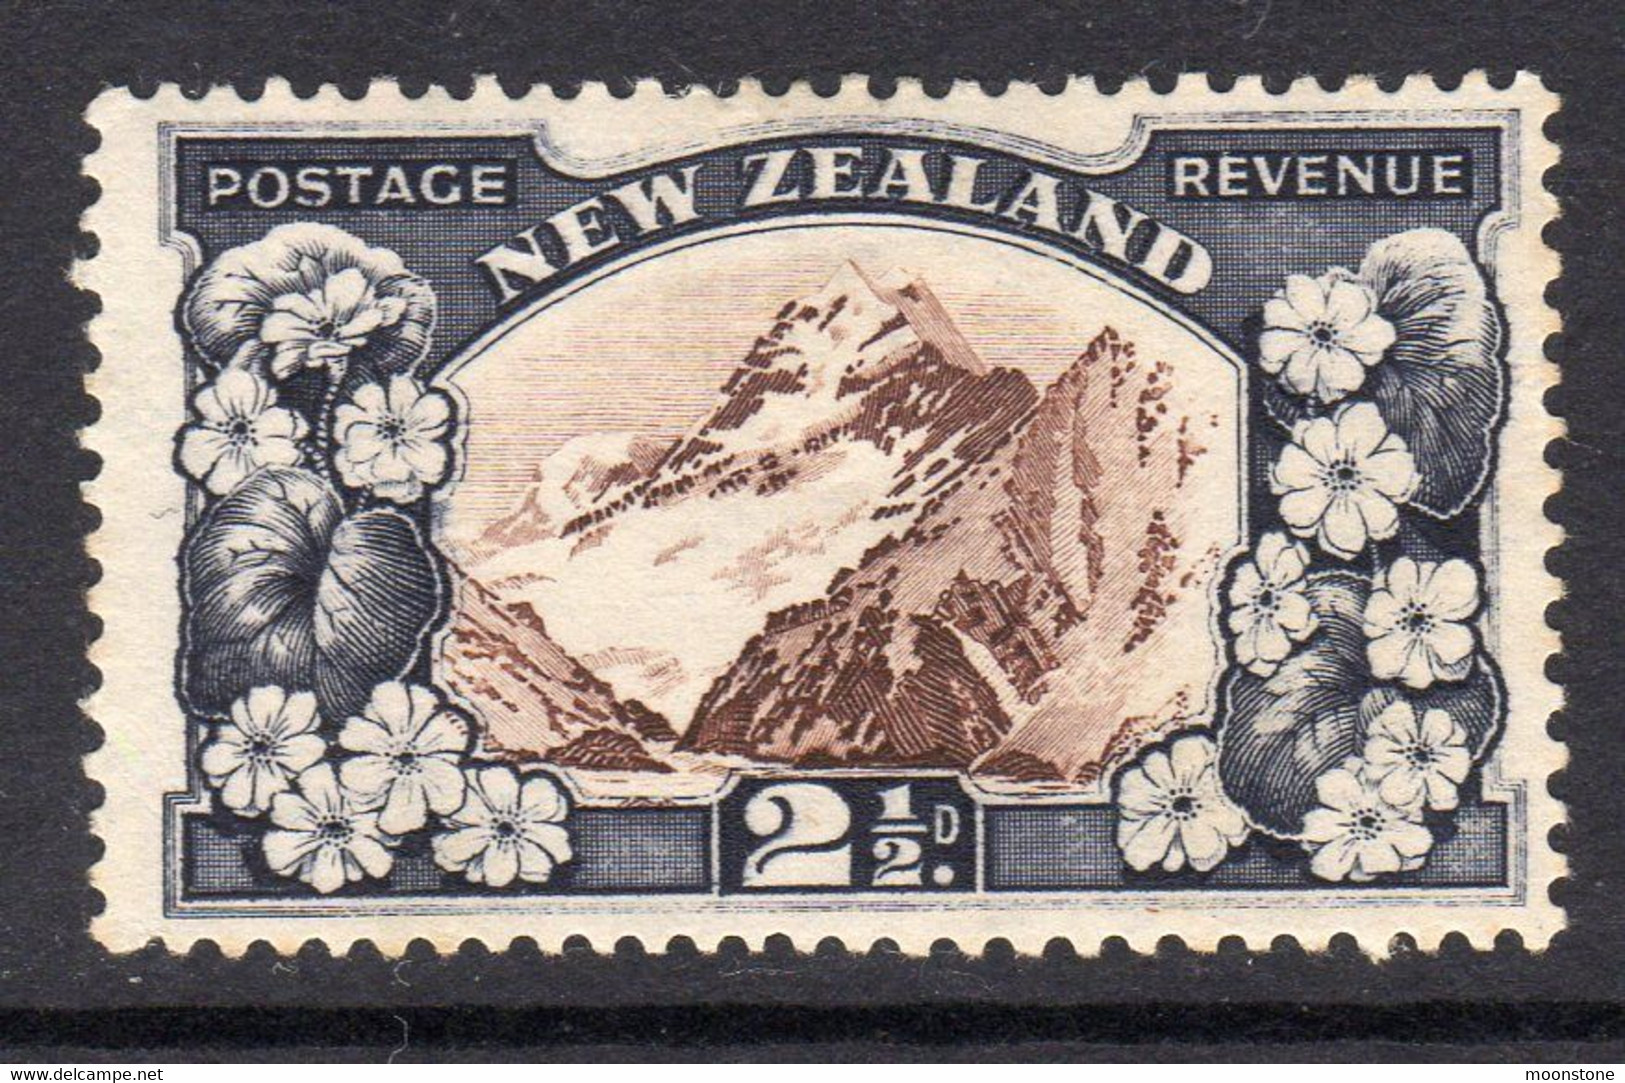 New Zealand GV 1935-6 2½d Mount Cook Definitive, Hinged Mint, SG 560 (A) - Nuevos